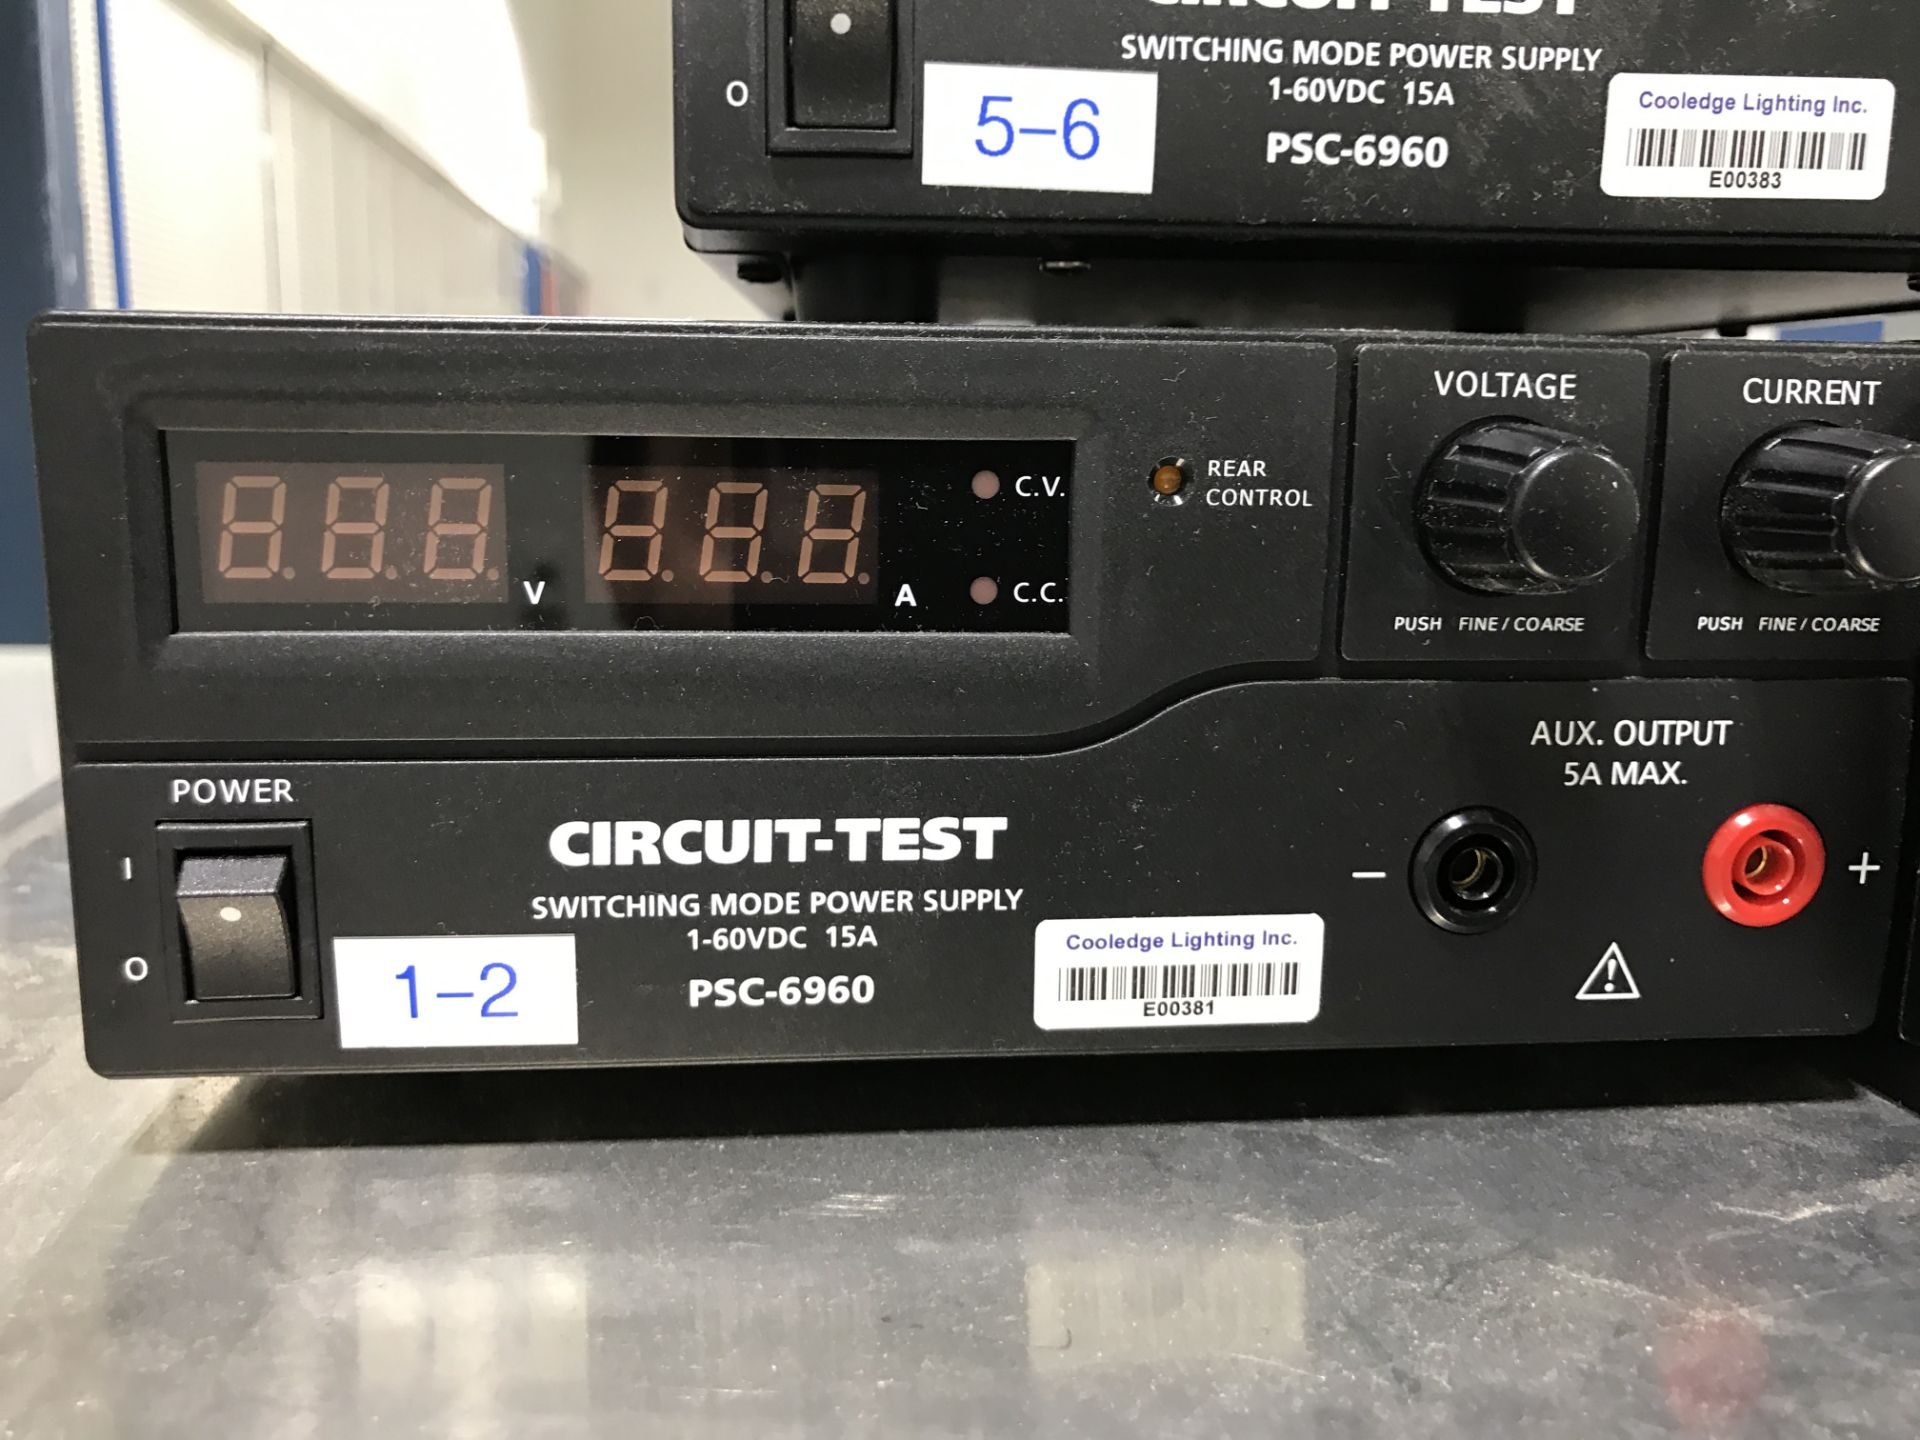 Circuit Test #PSC-6960 Circuit Test Switching Mode Power Supply 1-60VDC 15A - Image 2 of 2